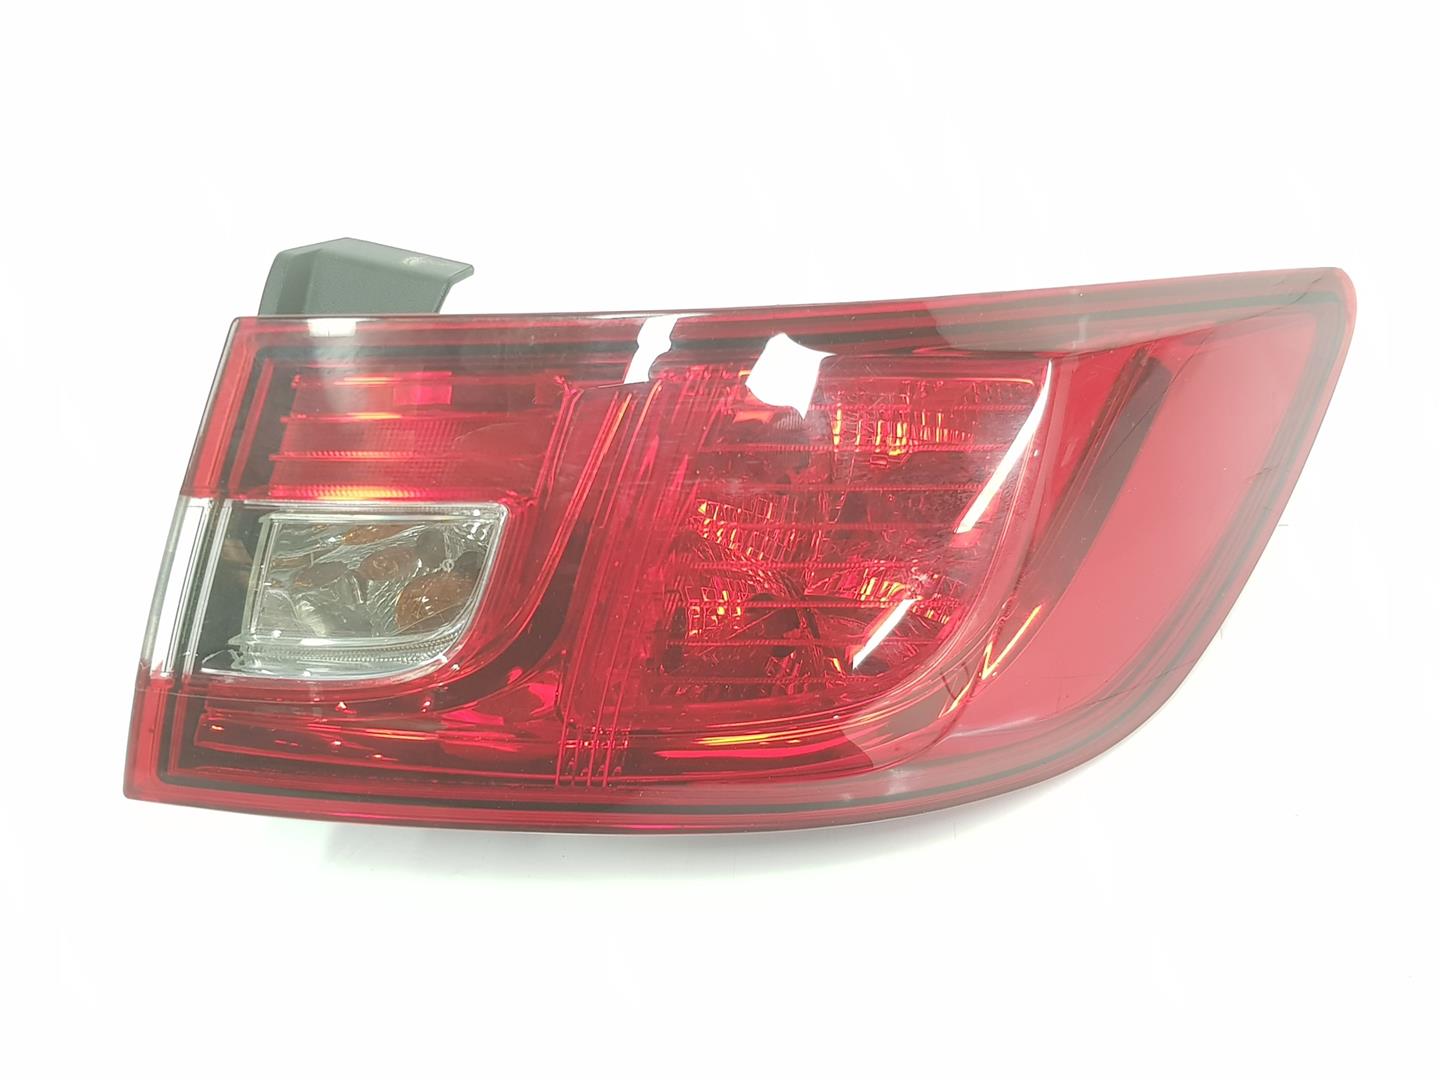 RENAULT Clio 3 generation (2005-2012) Rear Right Taillight Lamp 265509846R, 265509846R 24155445